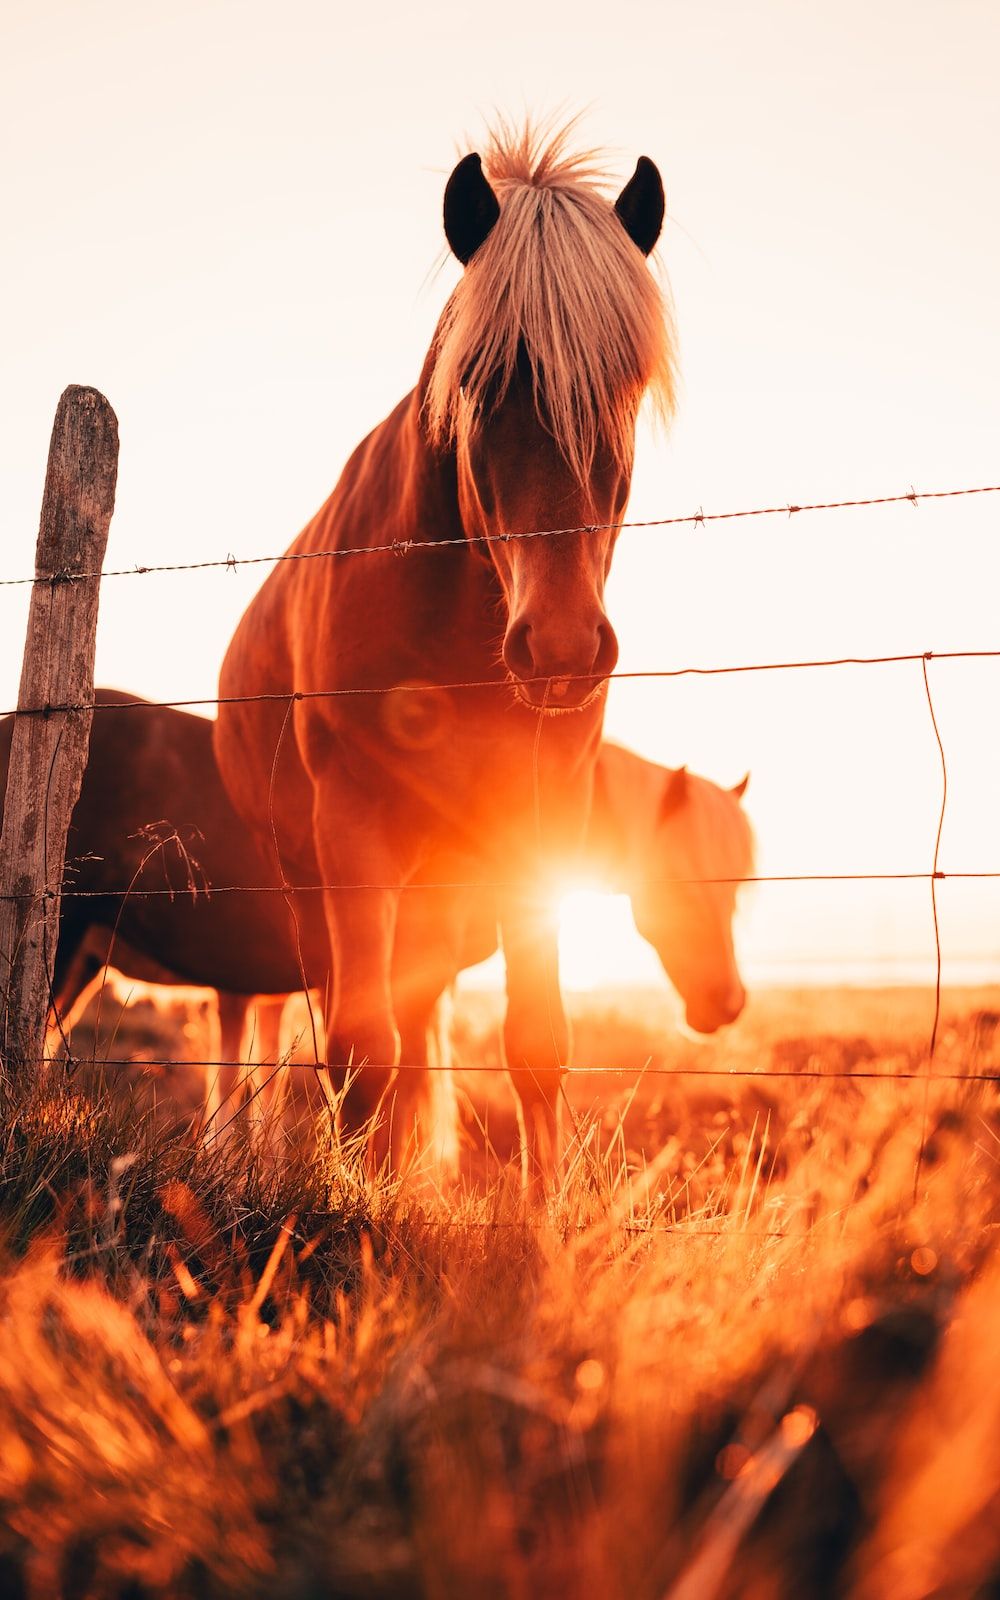 Colt Horse Picture. Download Free Image